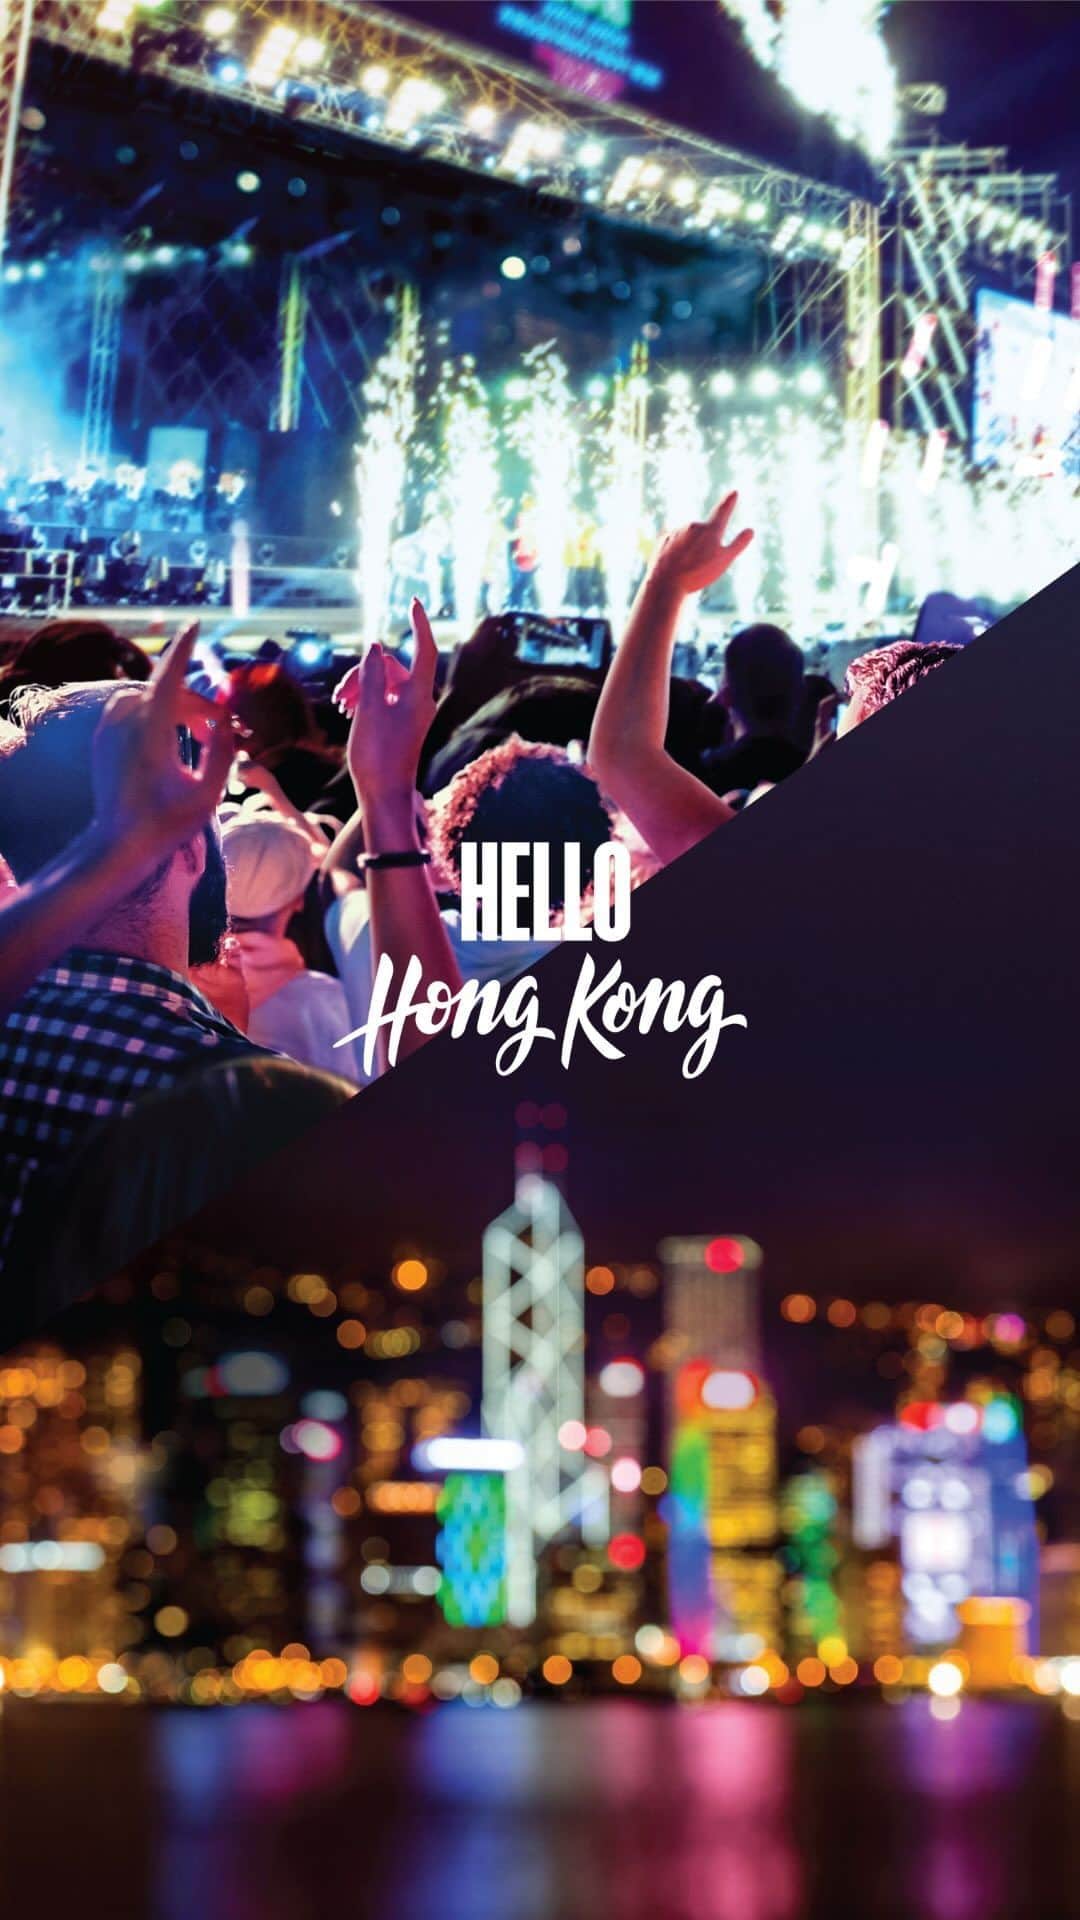 Discover Hong Kongのインスタグラム：「In Hong Kong, each story begins with a welcoming “Hello”👋🏻 and leads to so much more.   Embark on a captivating journey through Hong Kong, a city full of adventures, excitement, new perspectives and endless possibilities.⛰️  From the awe-inspiring skyline🌇 to the bustling street markets, from tranquil nature to dynamic nightlife🌃, every corner of our city offers a new perspective.  Come say “Hello” to a city that always takes you to more unique discoveries. 👋🏻🤩   一聲「Hello」👋🏻，就可以喺香港打開一個新故事。  從繁華都市到咫尺自然⛰️、品味美食、夜間生活節拍…唔同元素都匯聚於呢個城市。🌇🌃  快啲同香港講「Hello」，開始每個獨一無二嘅香港故事！👋🏻🤩  #HelloHongKong #DiscoverHongKong #HelloTakesYouToMore」